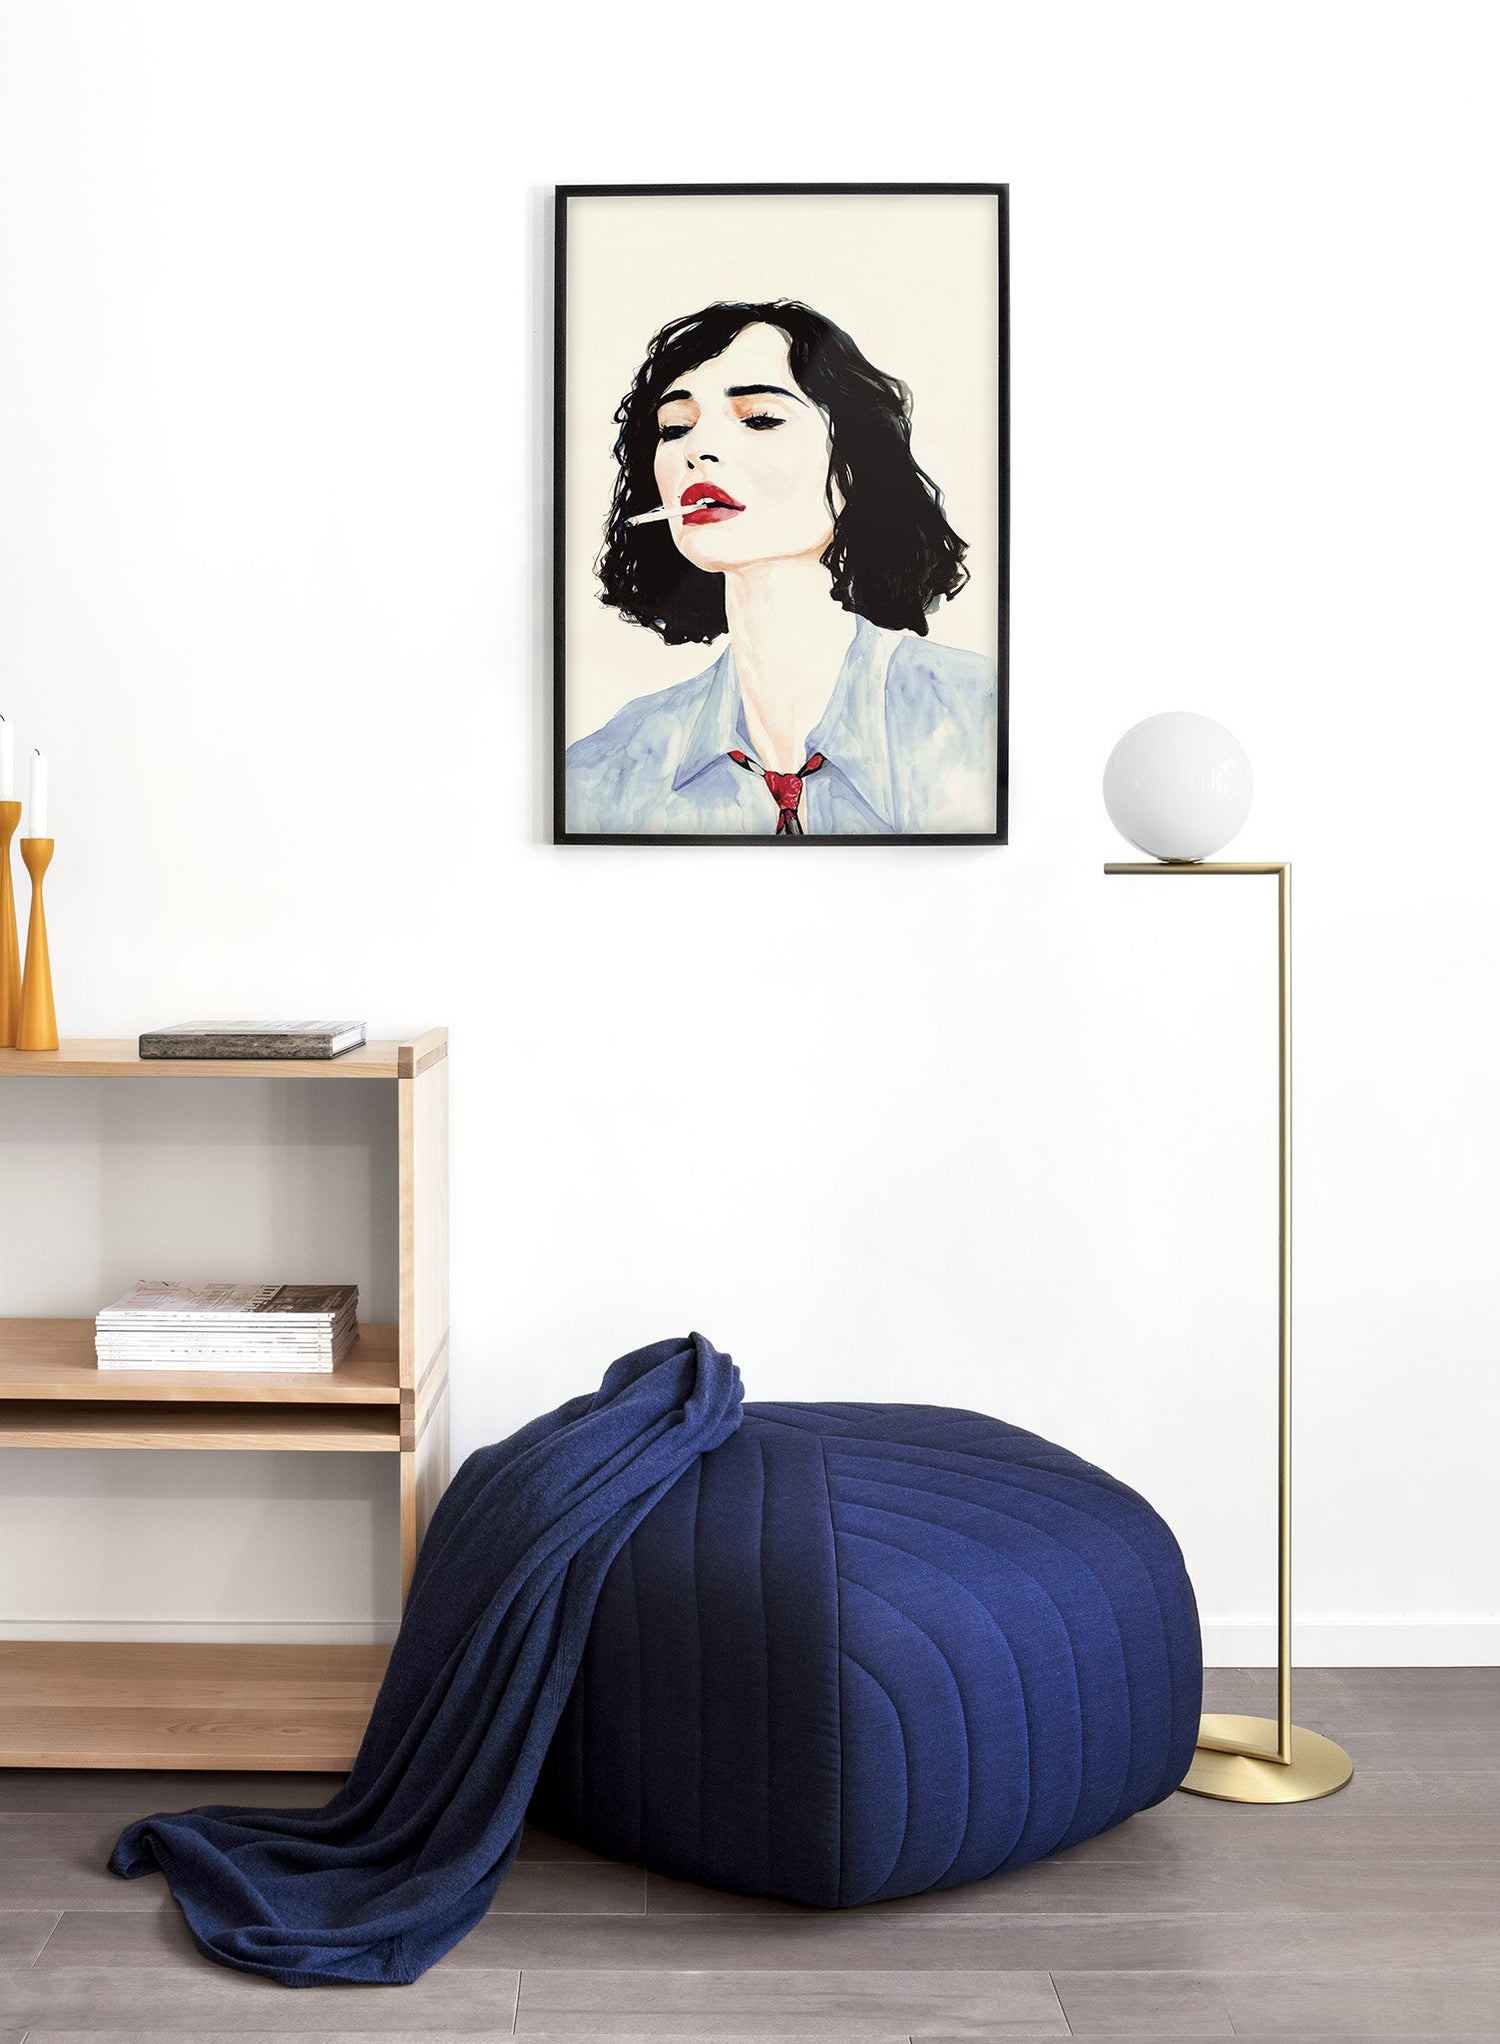 Fashion illustration poster by Opposite Wall with woman smoking cigarette - Lifestyle - Living Room